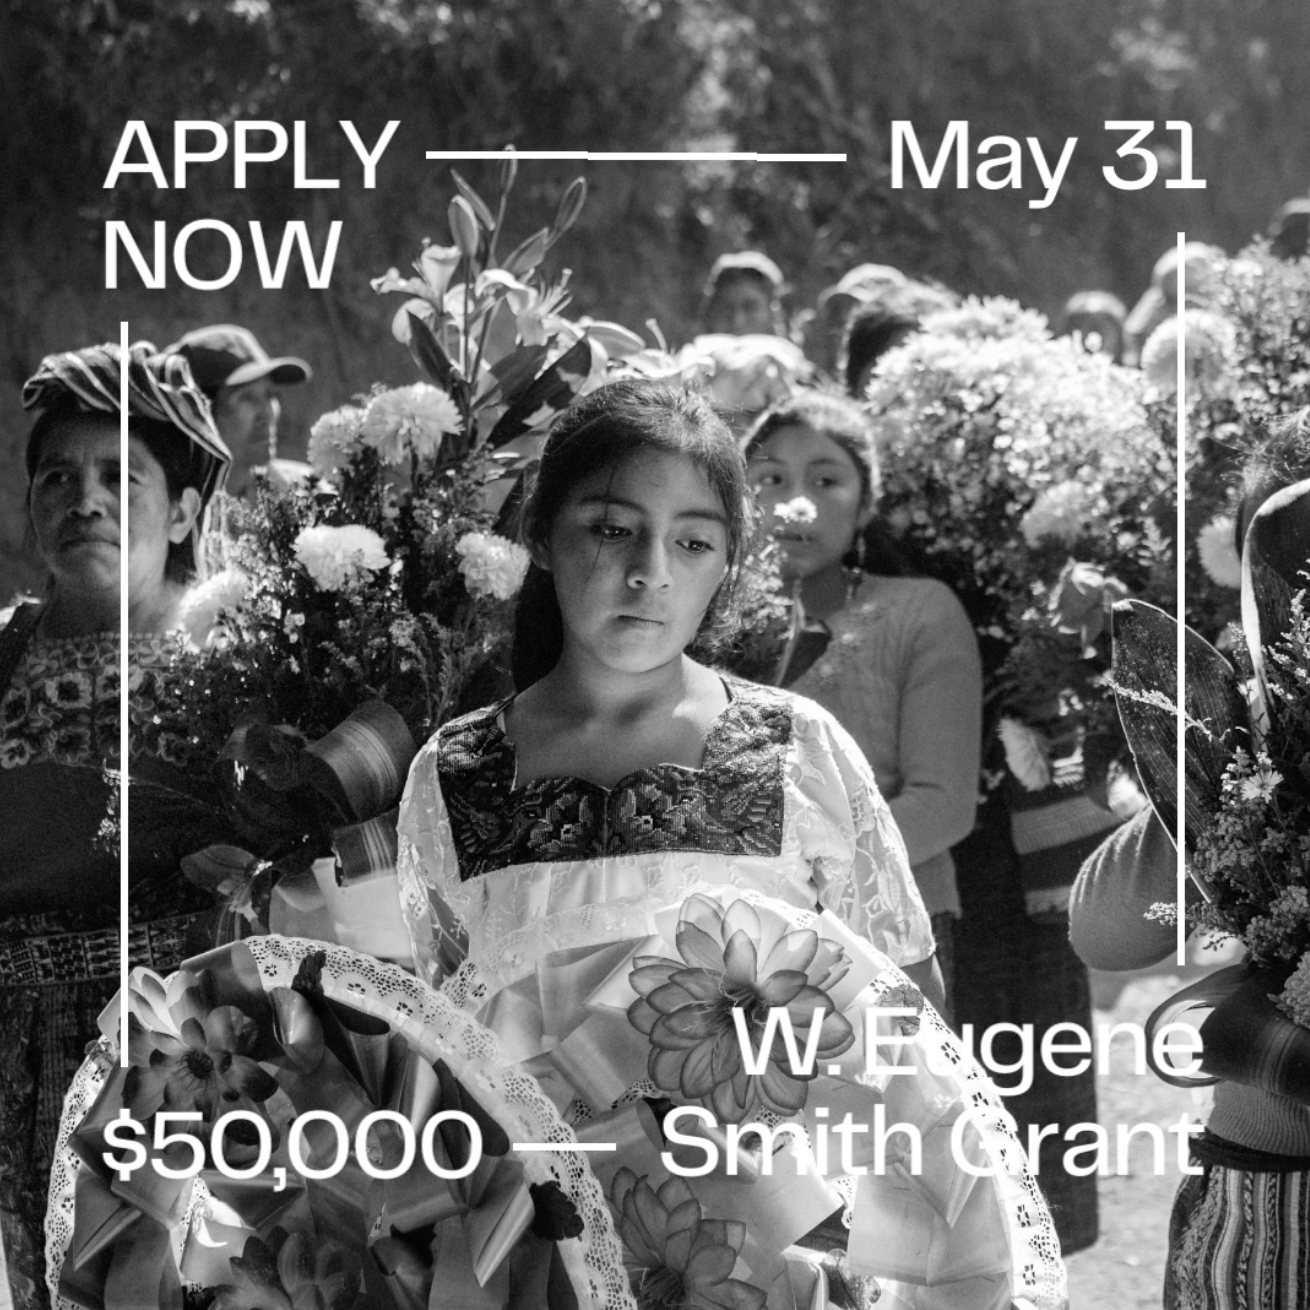 W. Eugene Smith accepting grant applications!